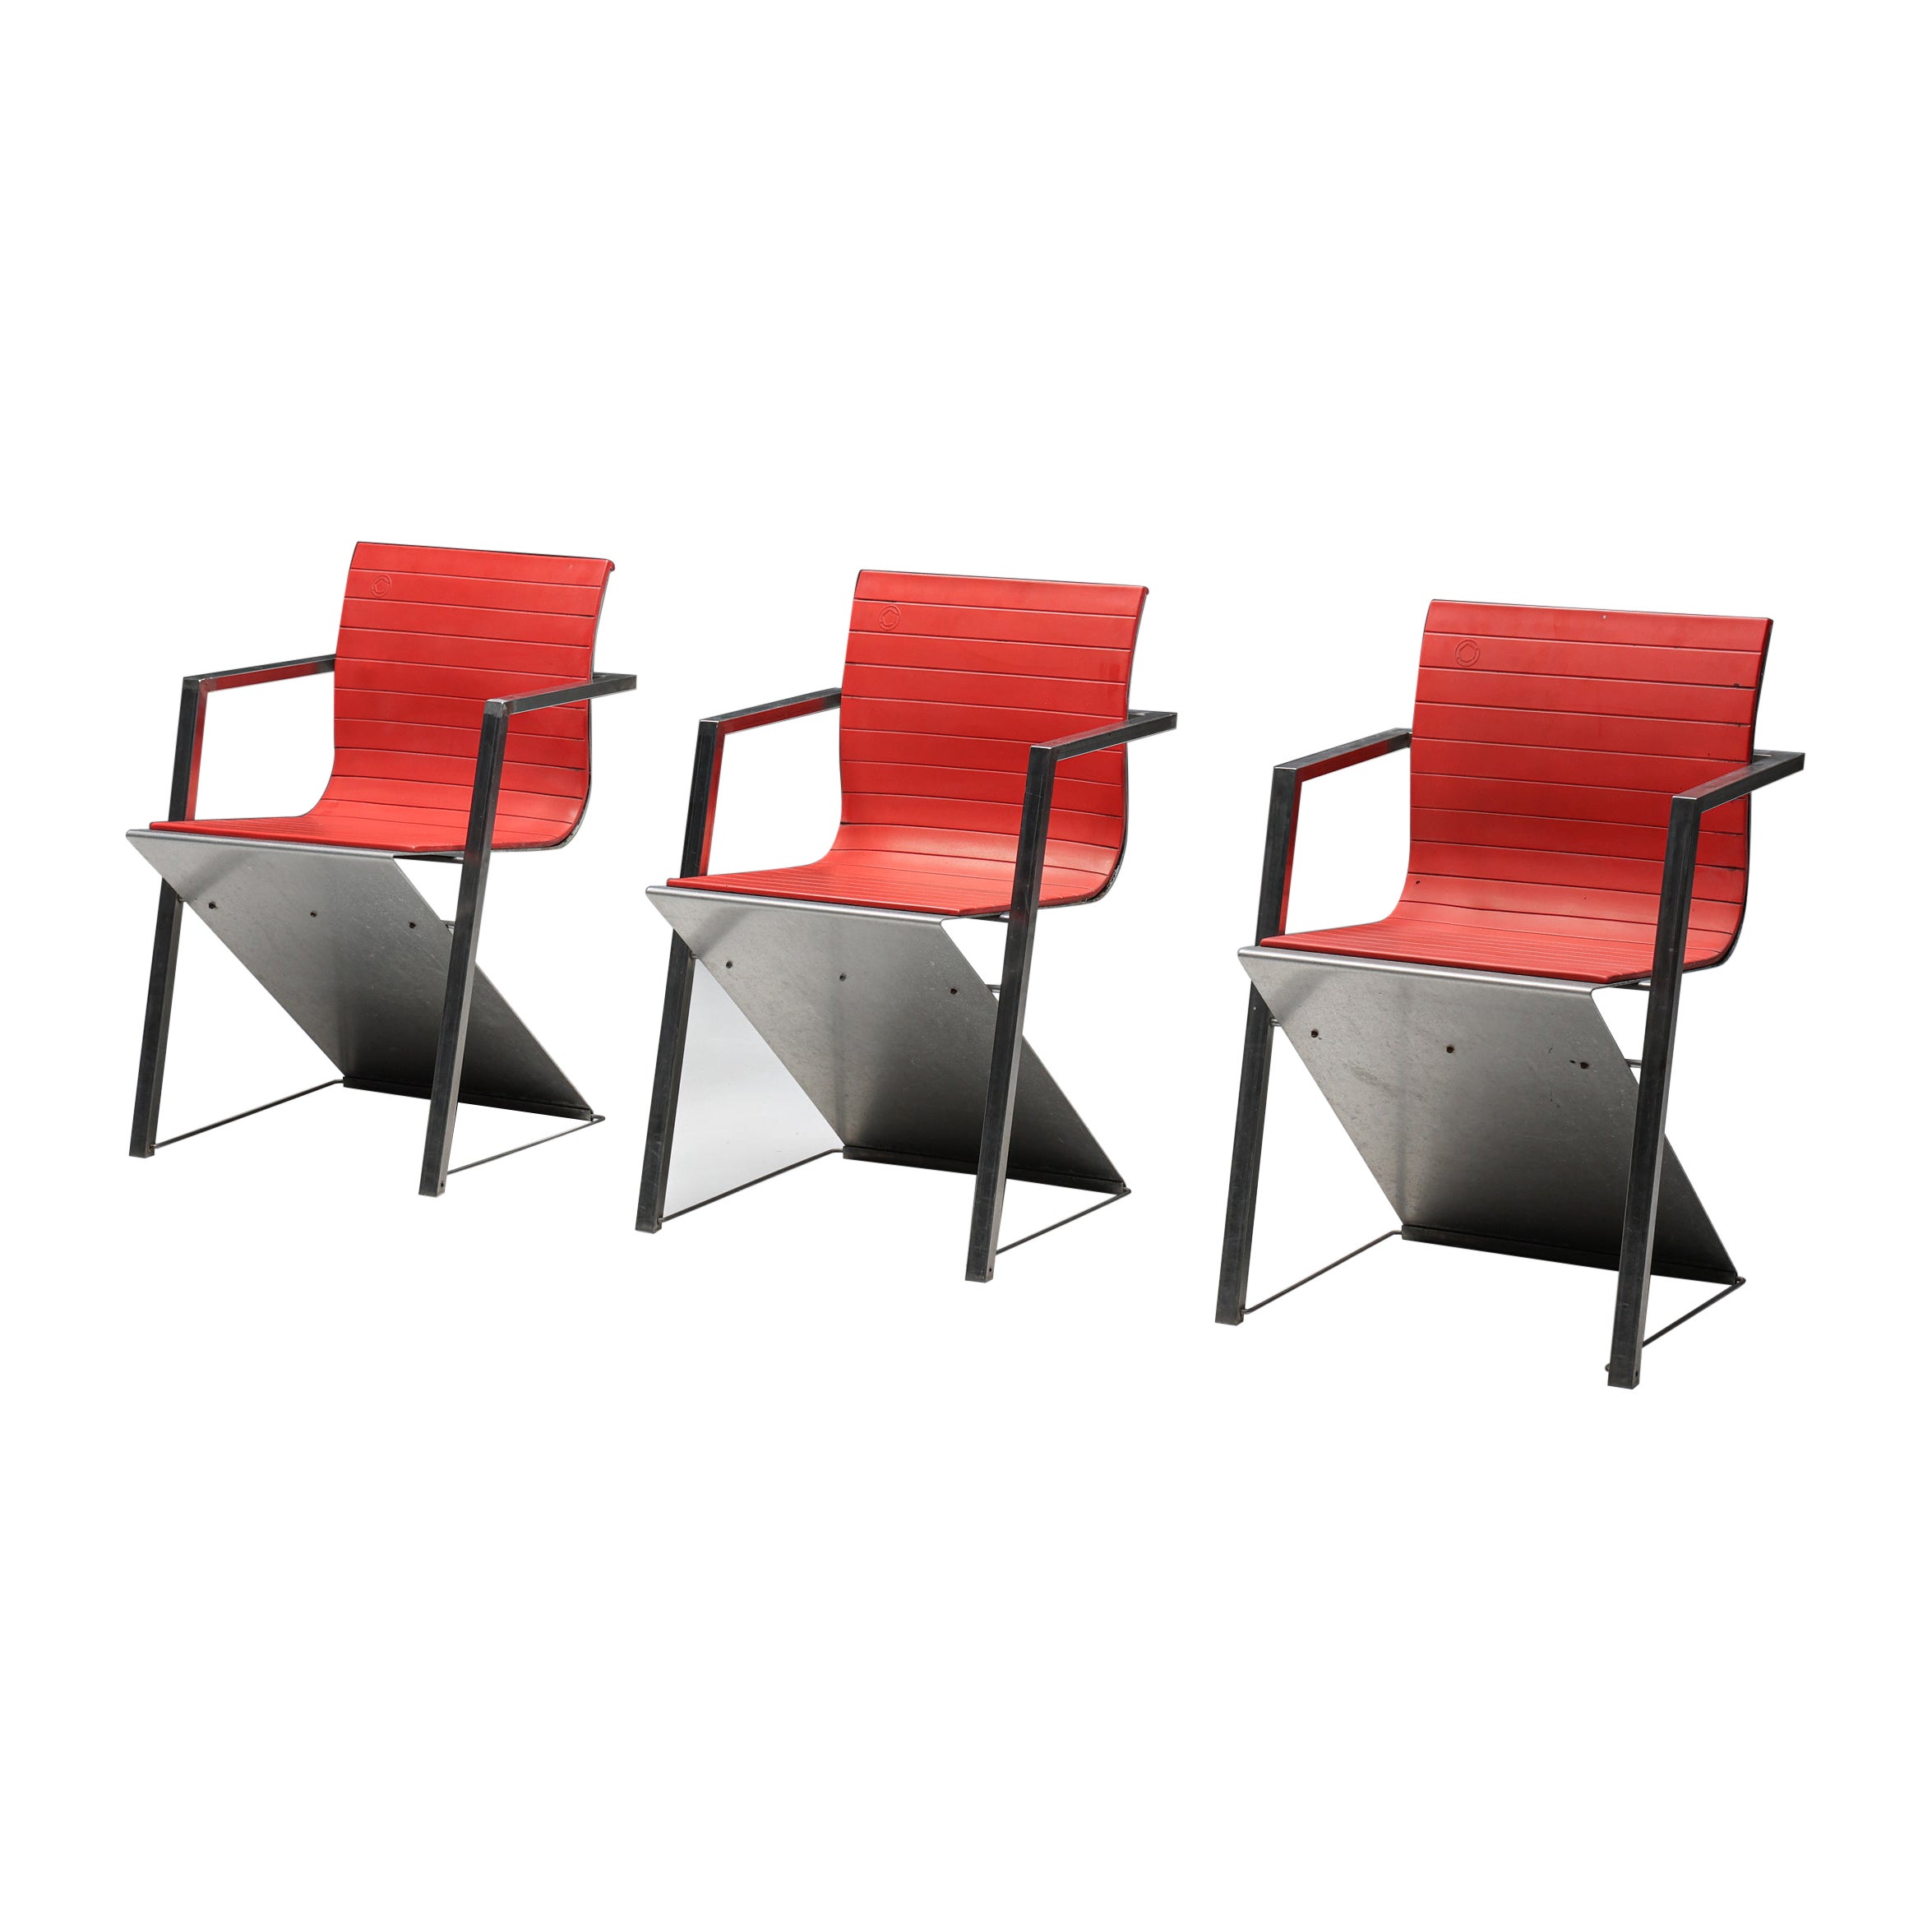 Pentagon Group Casino Model ‘d8’ Red Chairs, Germany, 1987 For Sale